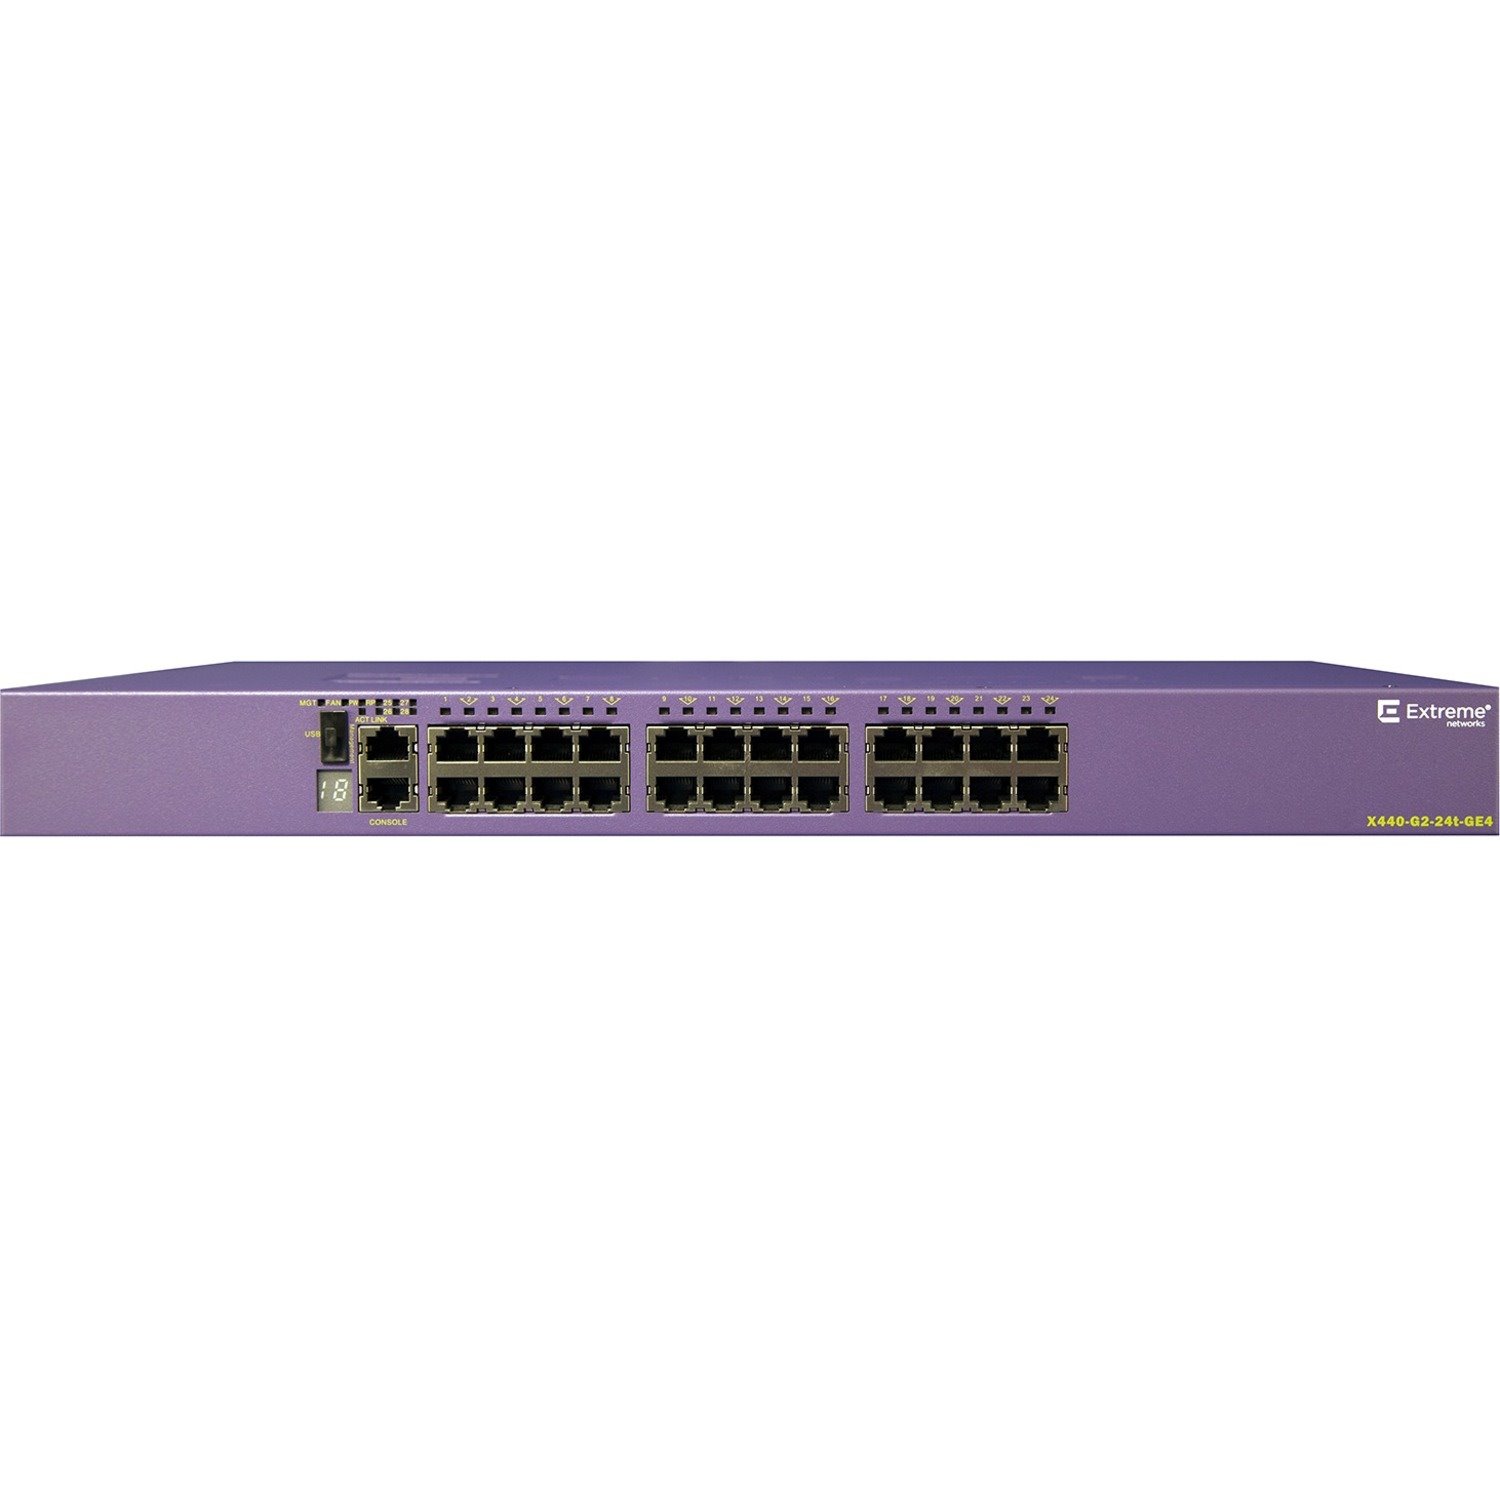 Extreme Networks X440-G2-24t-GE4 Ethernet Switch